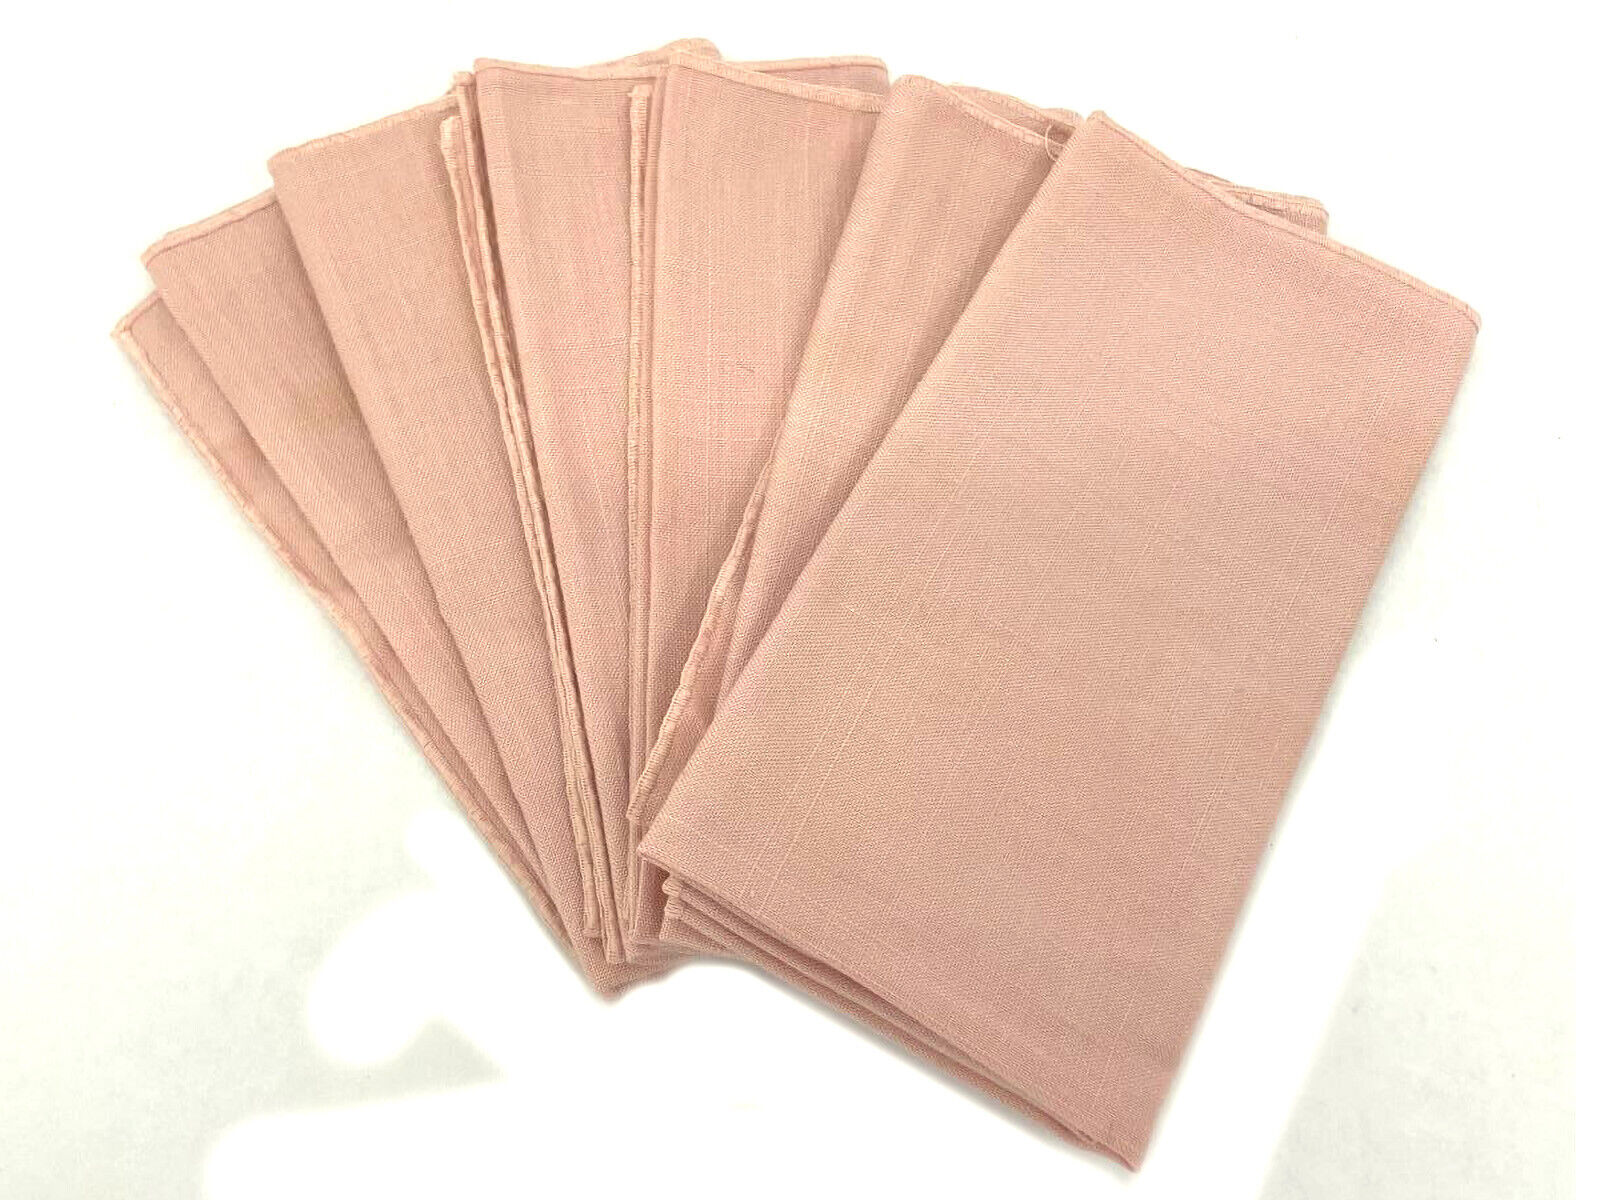 Lot of 6 Cloth Table Napkins Pink Fabric